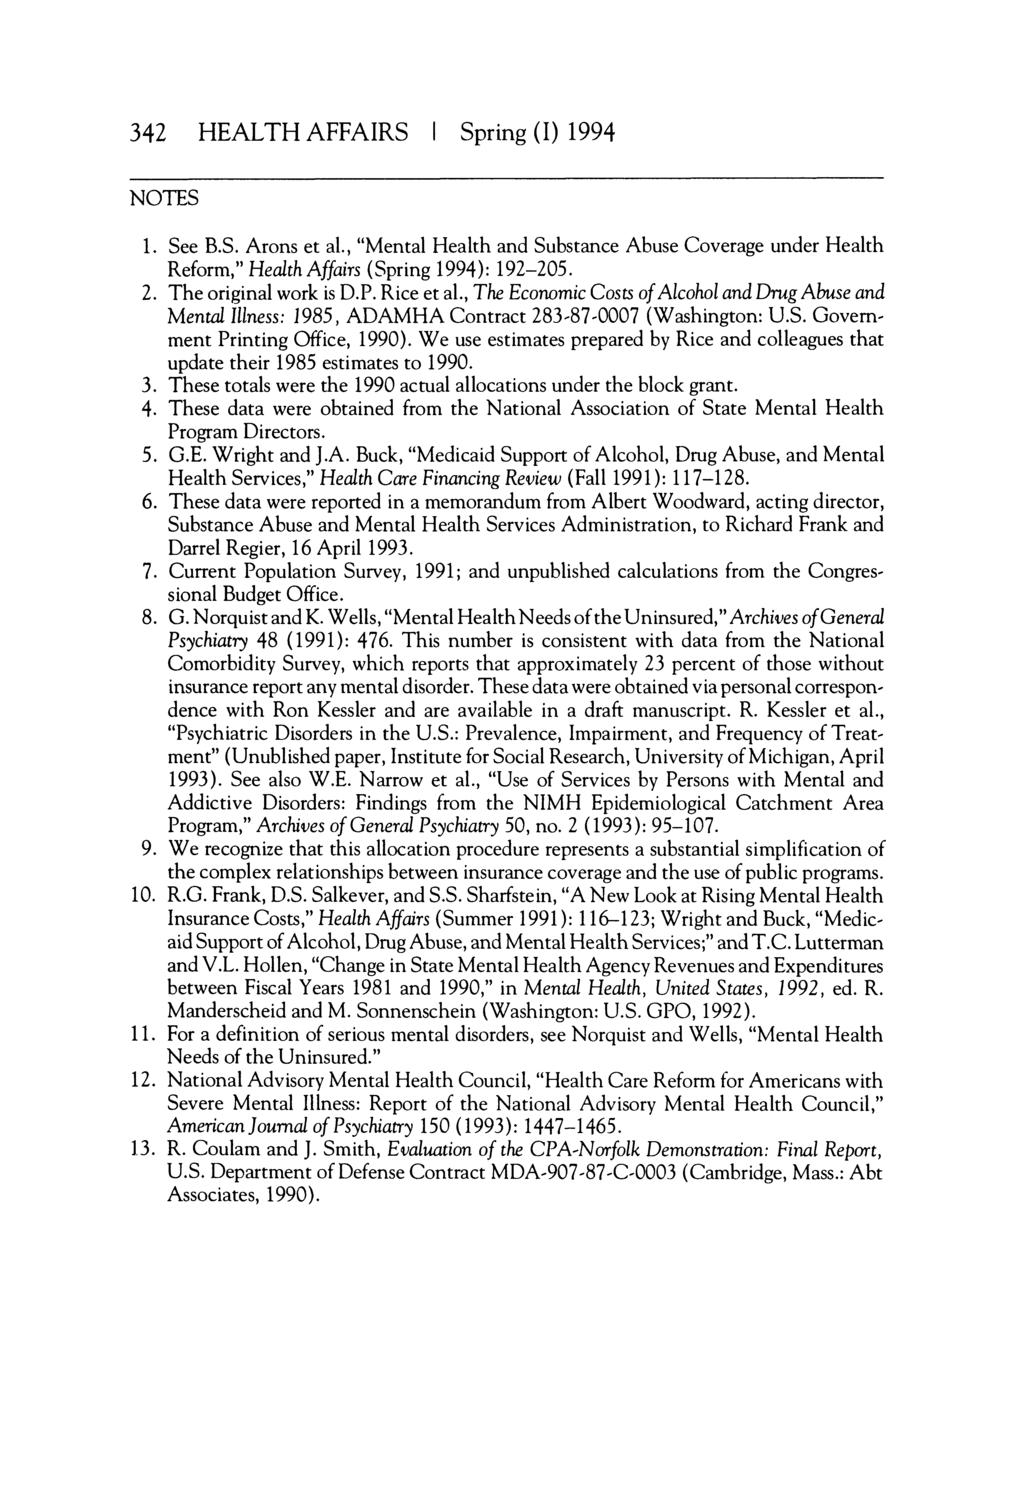 342 HEALTH AFFAIRS Spring (I) 1994 NOTES 1. See B.S. Arons et al, "Mental Health and Substance Abuse Coverage under Health Reform," Health Affairs (Spring 1994): 192-205. 2. The original work is D.P.